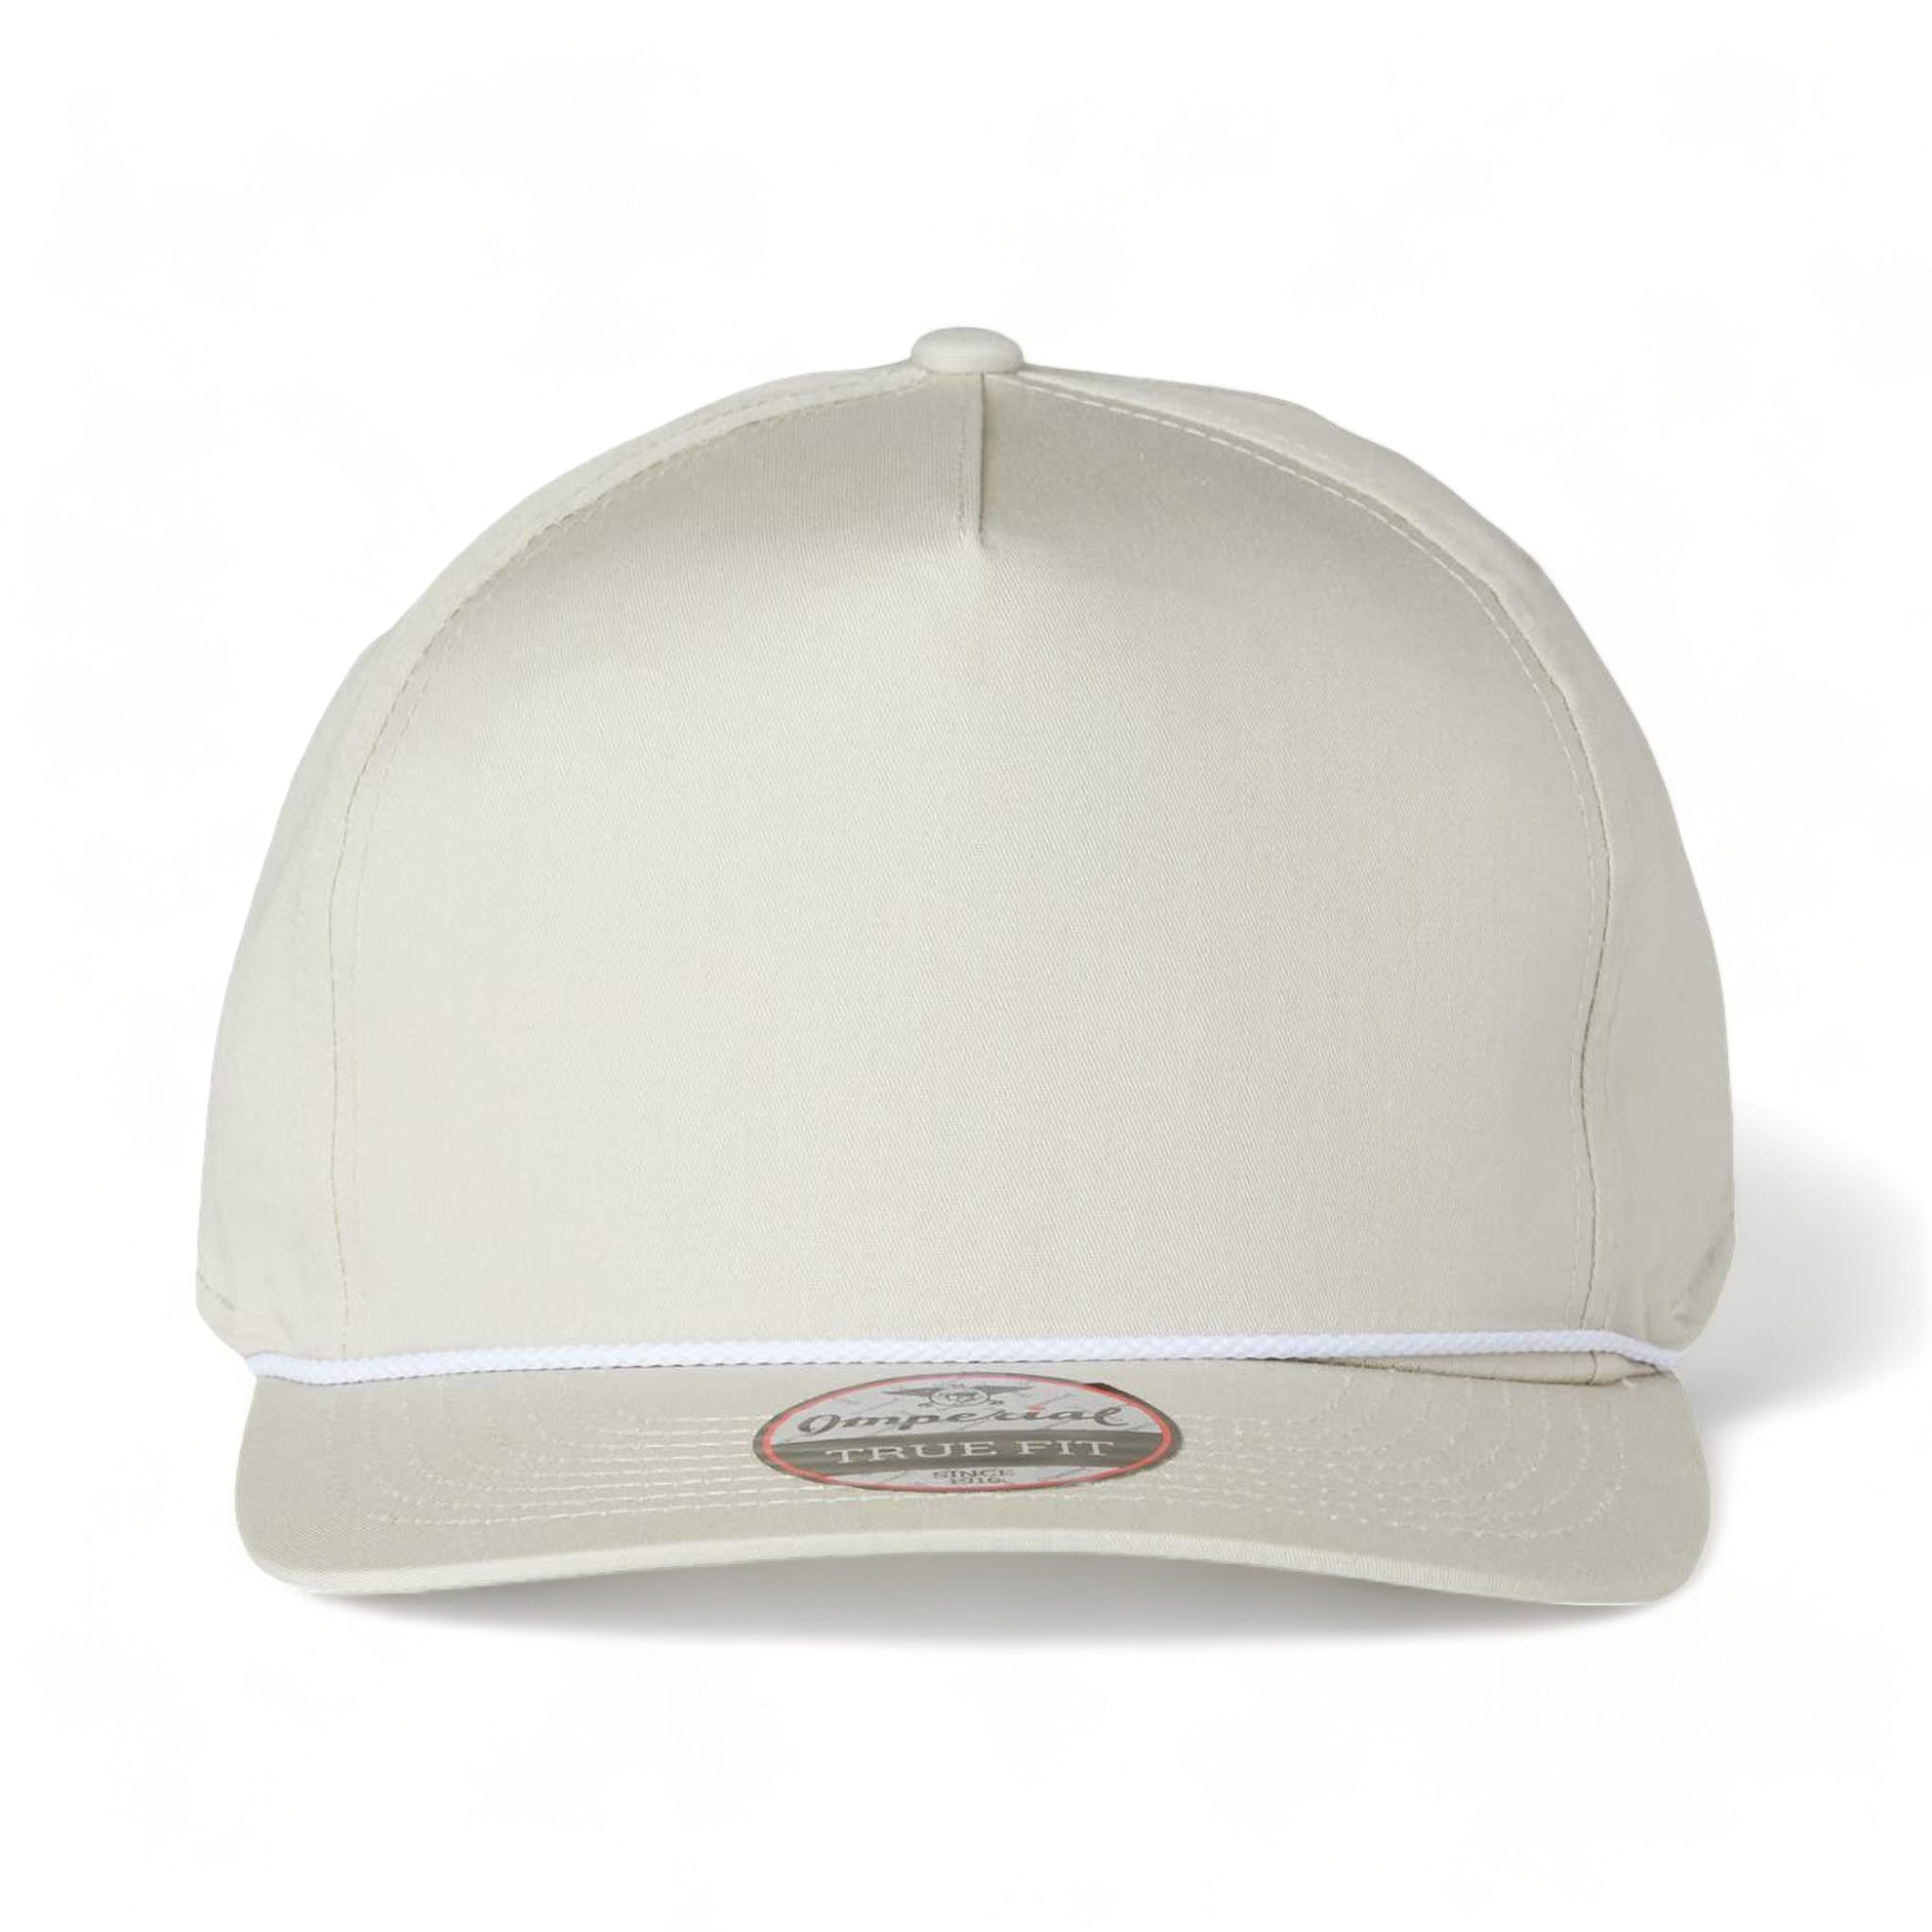 Front view of Imperial 5056 custom hat in putty and white